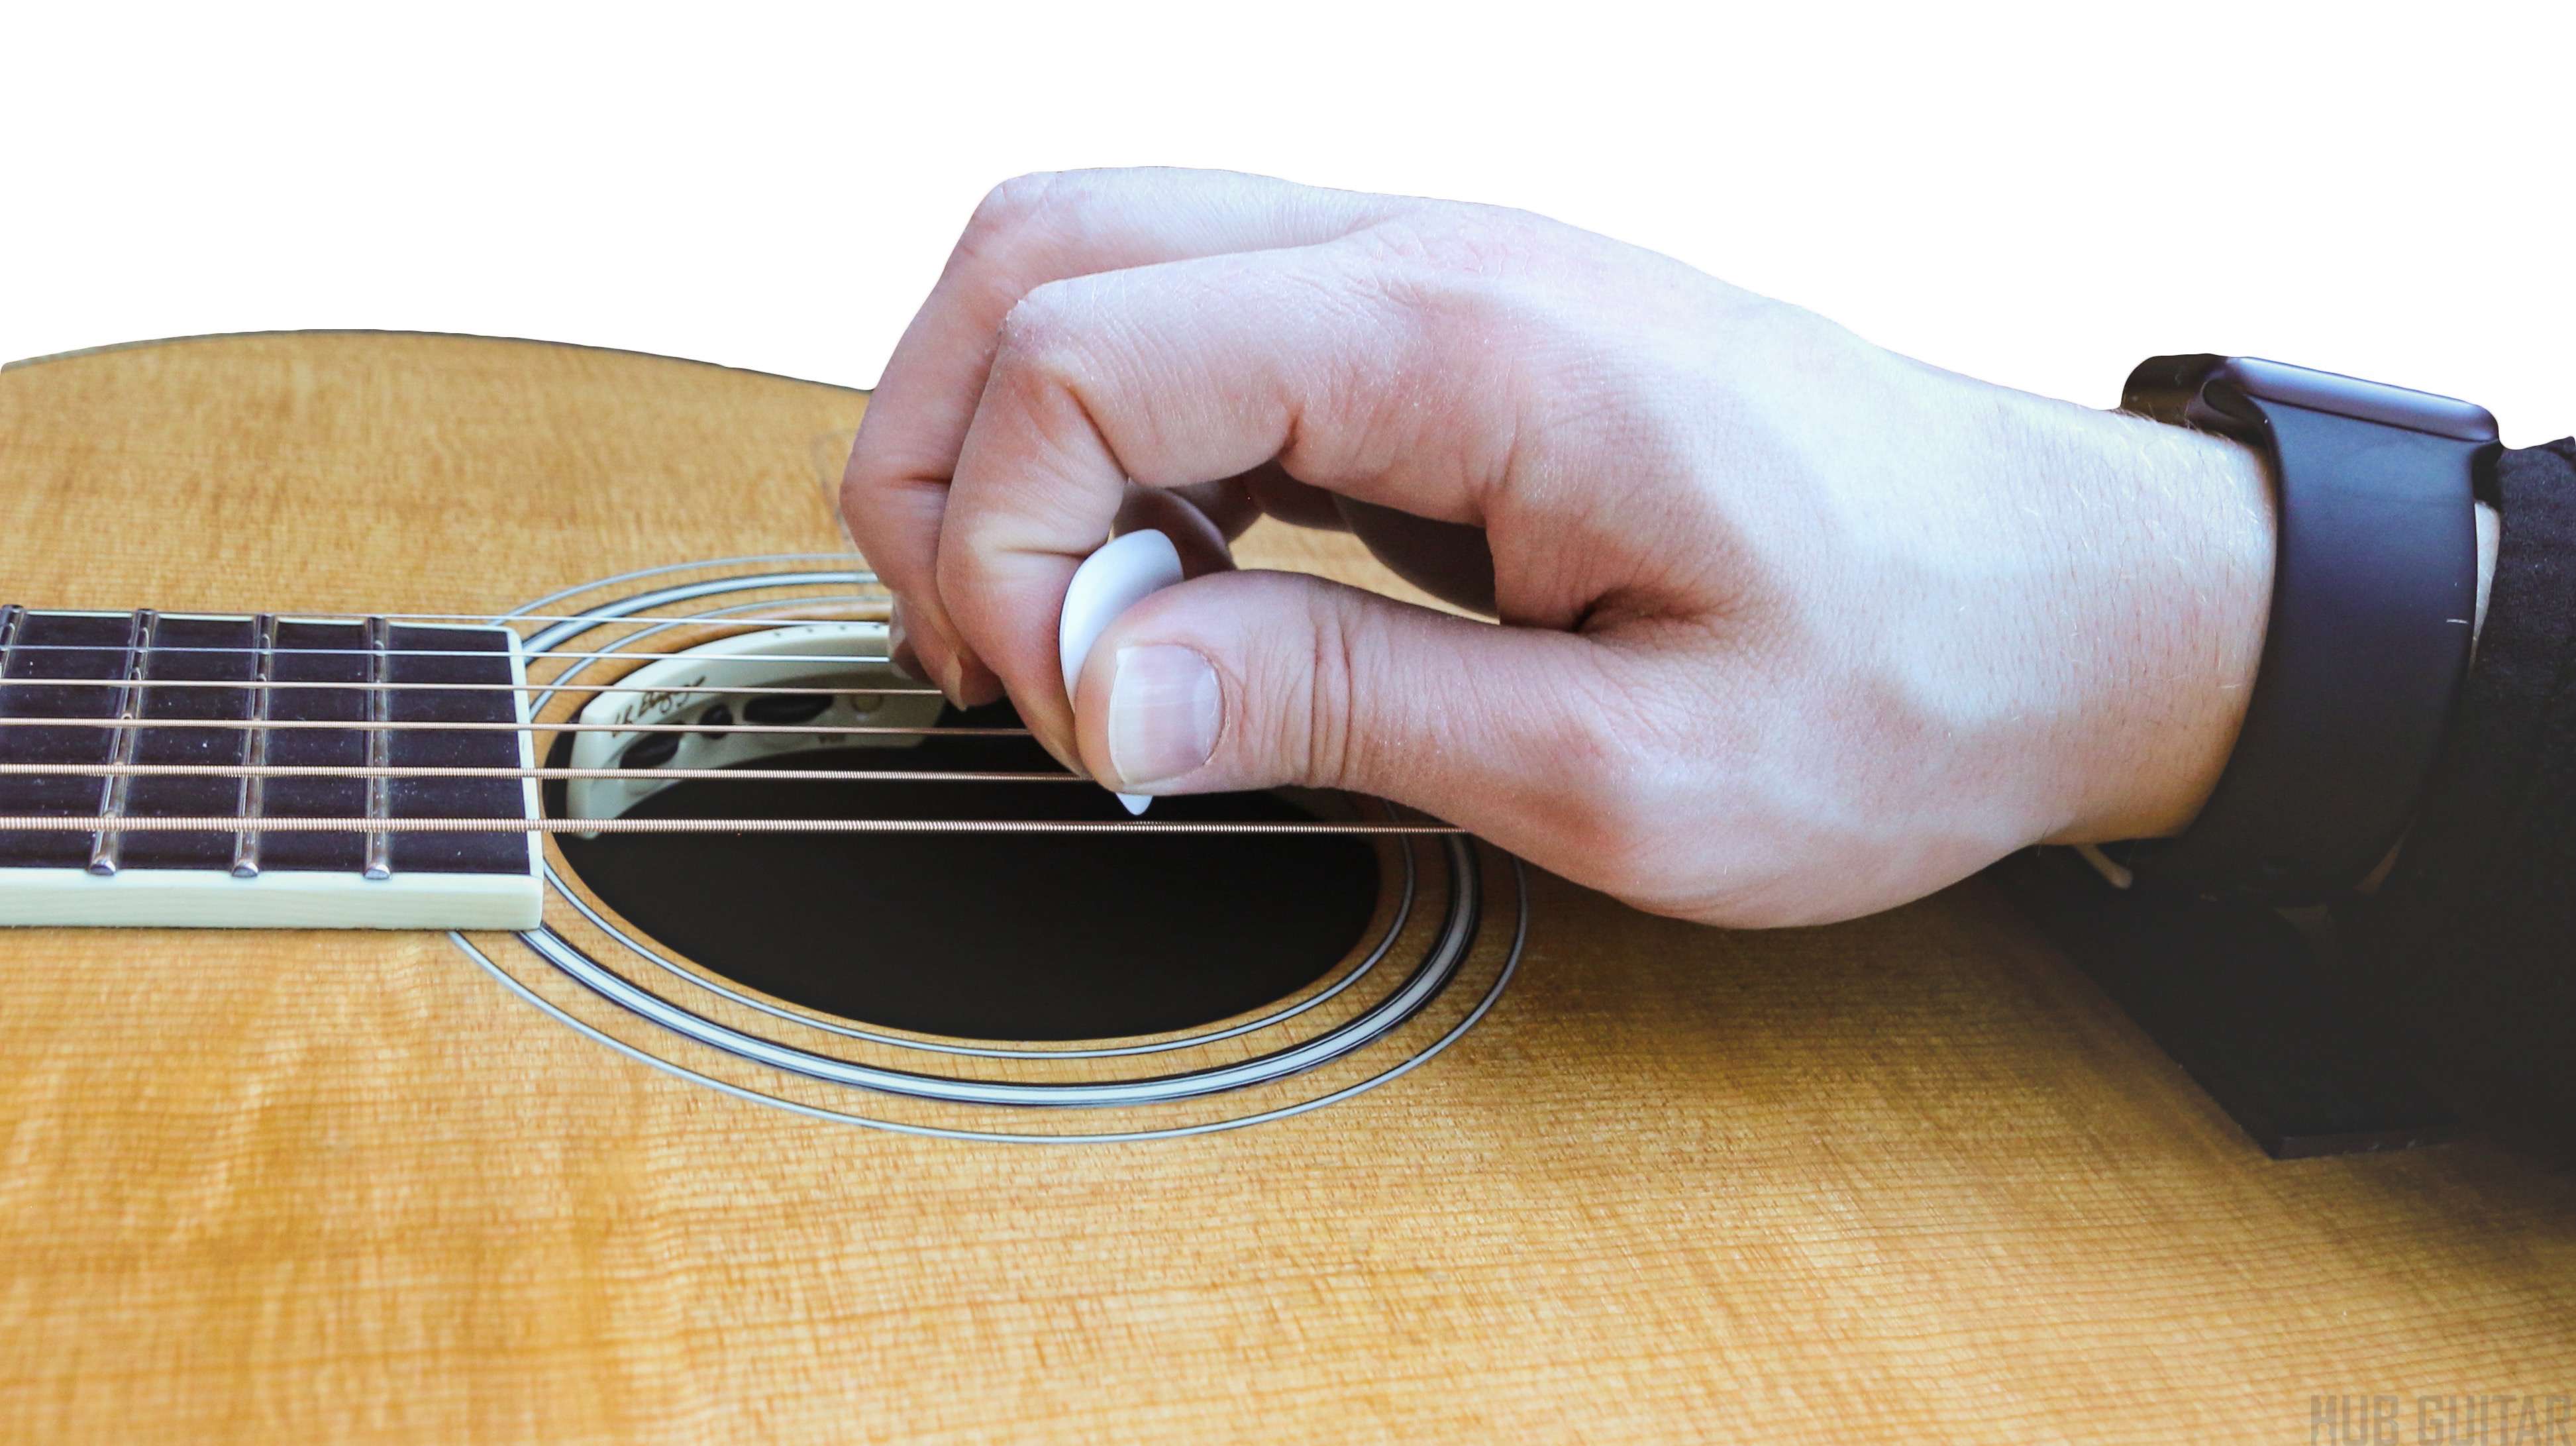 How To Hold The Pick Hub Guitar